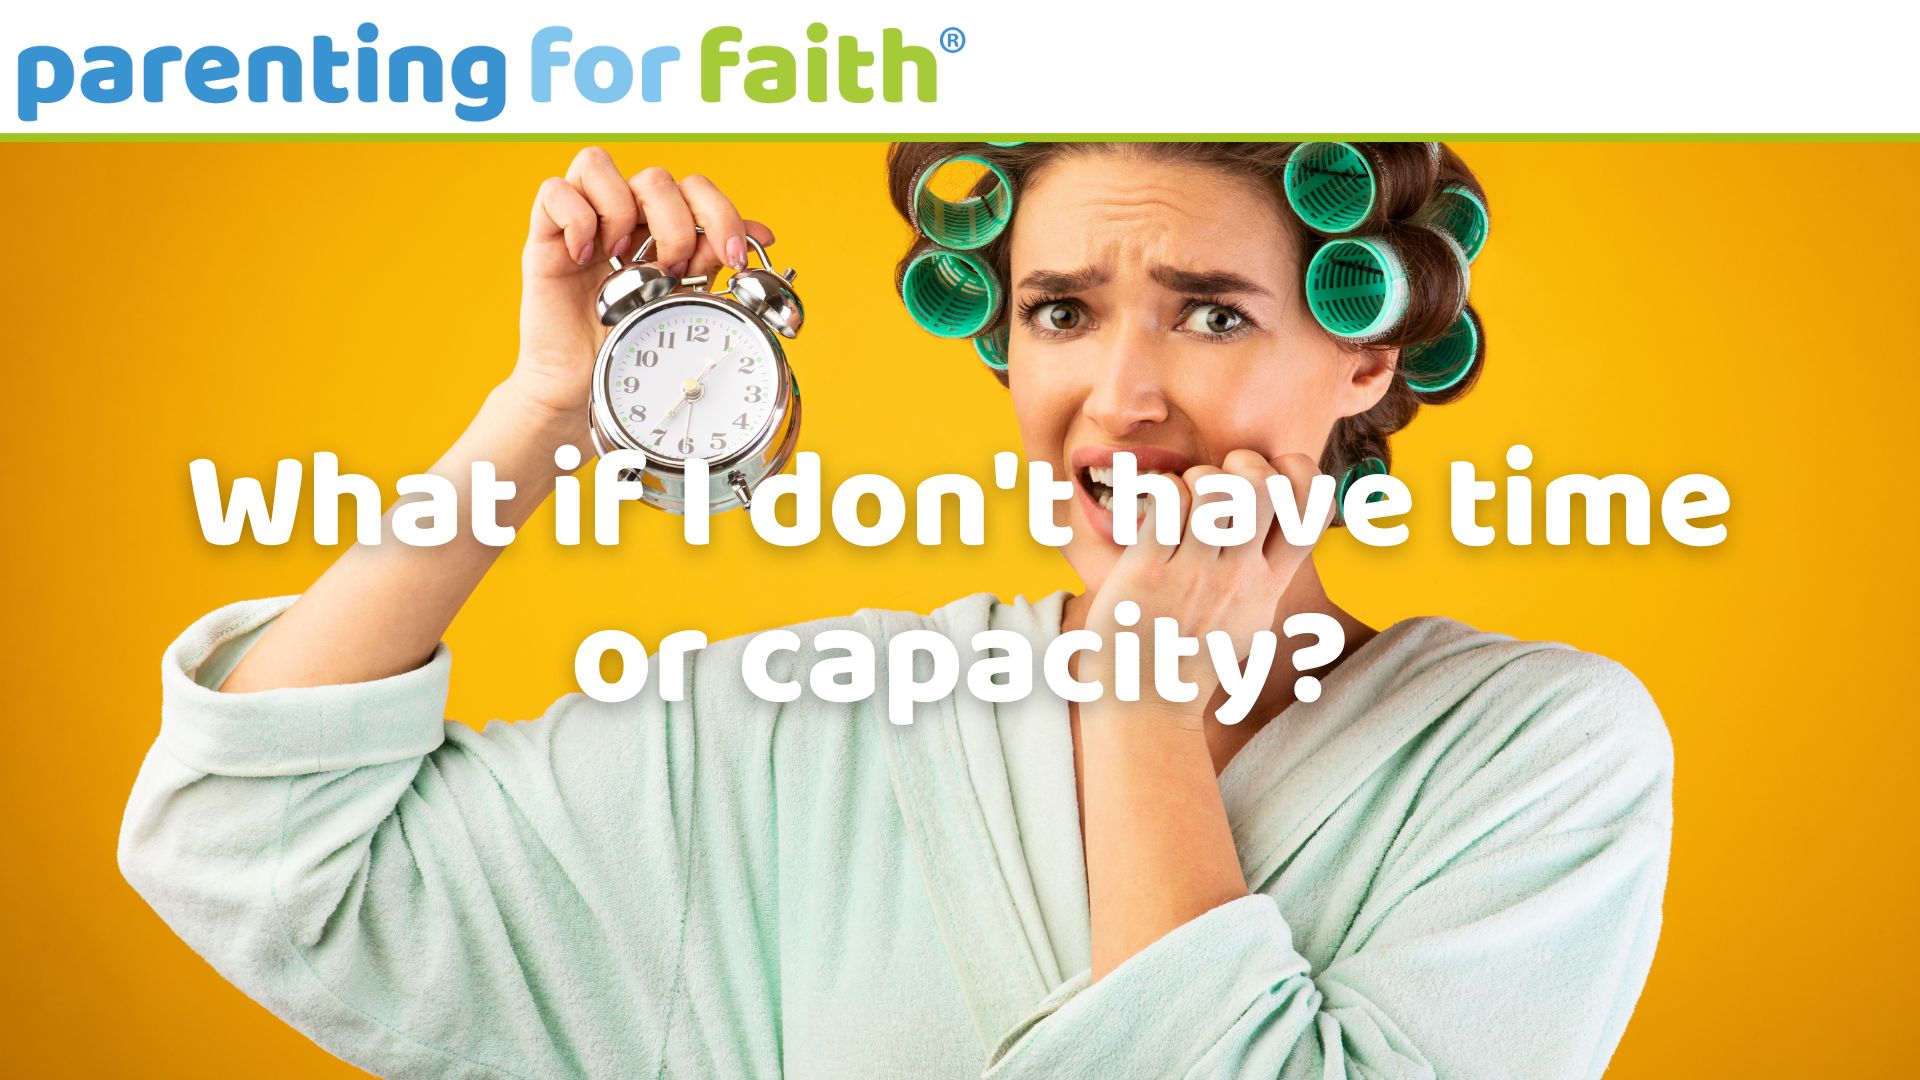 What if I don't have time or capacity image credit prostock studio